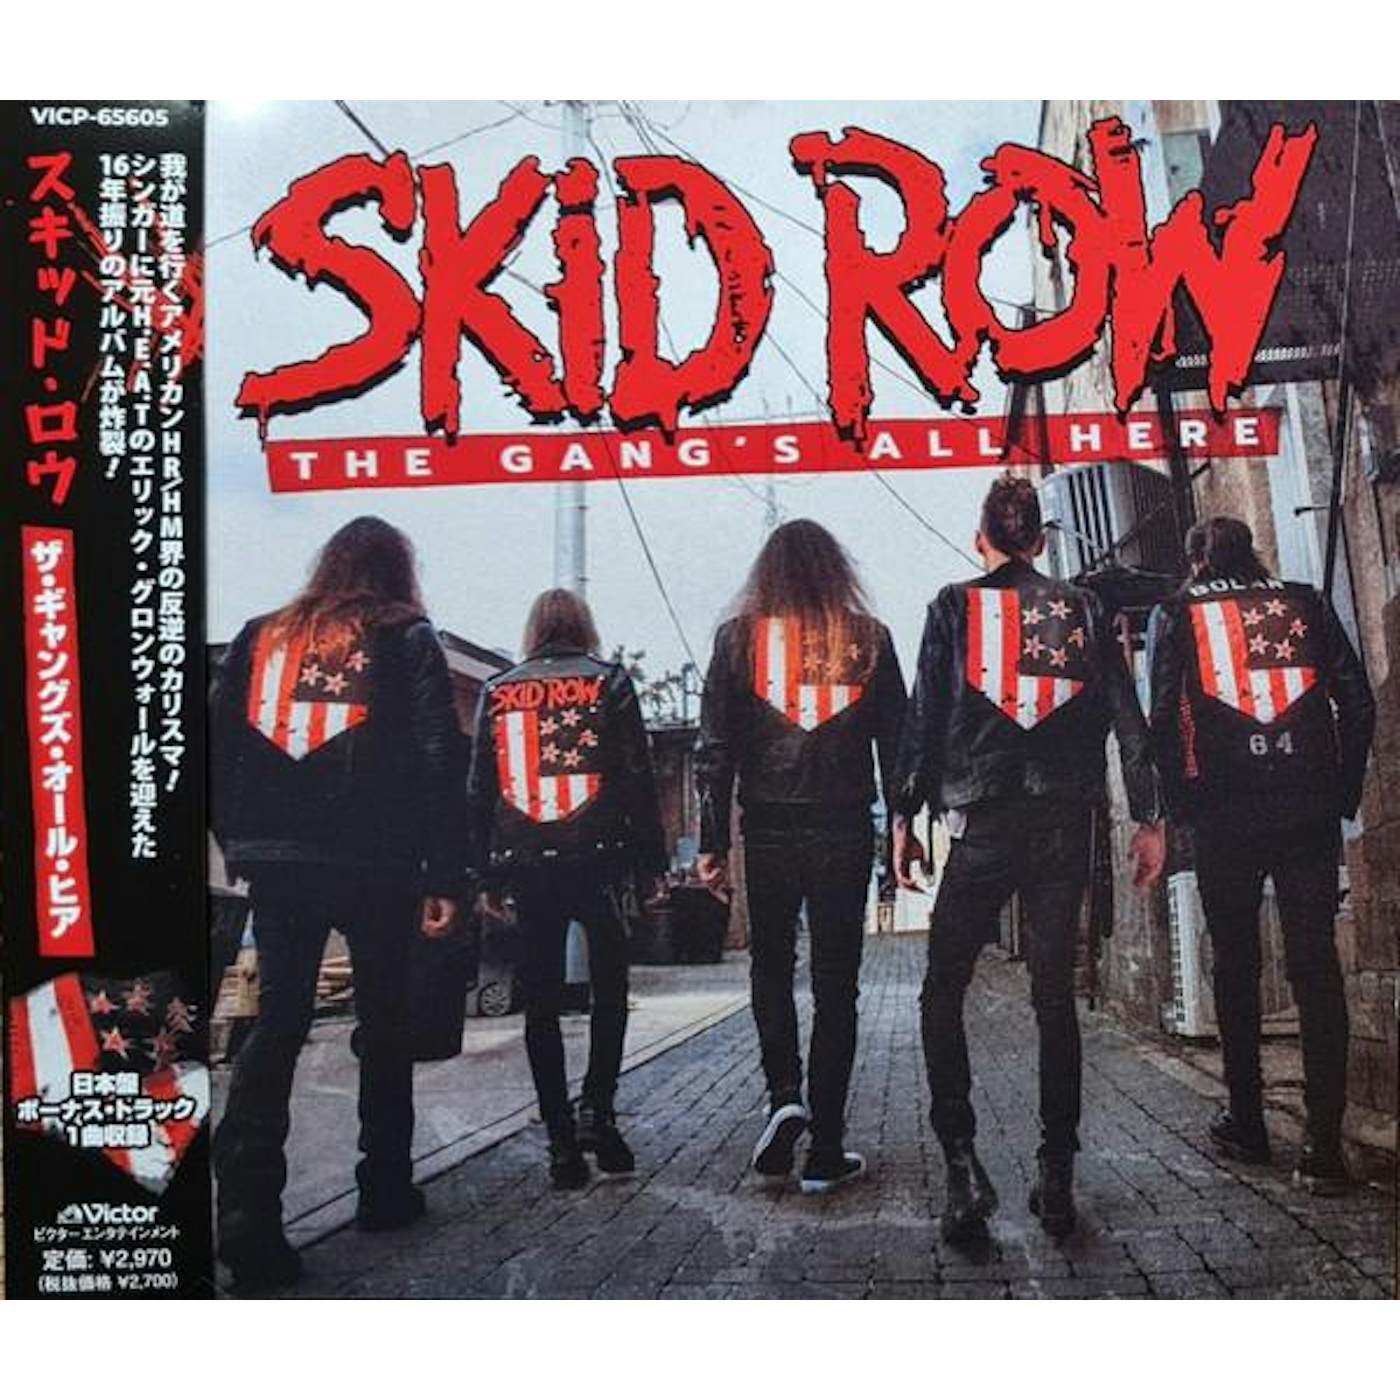 Skid Row GANG'S ALL HERE CD